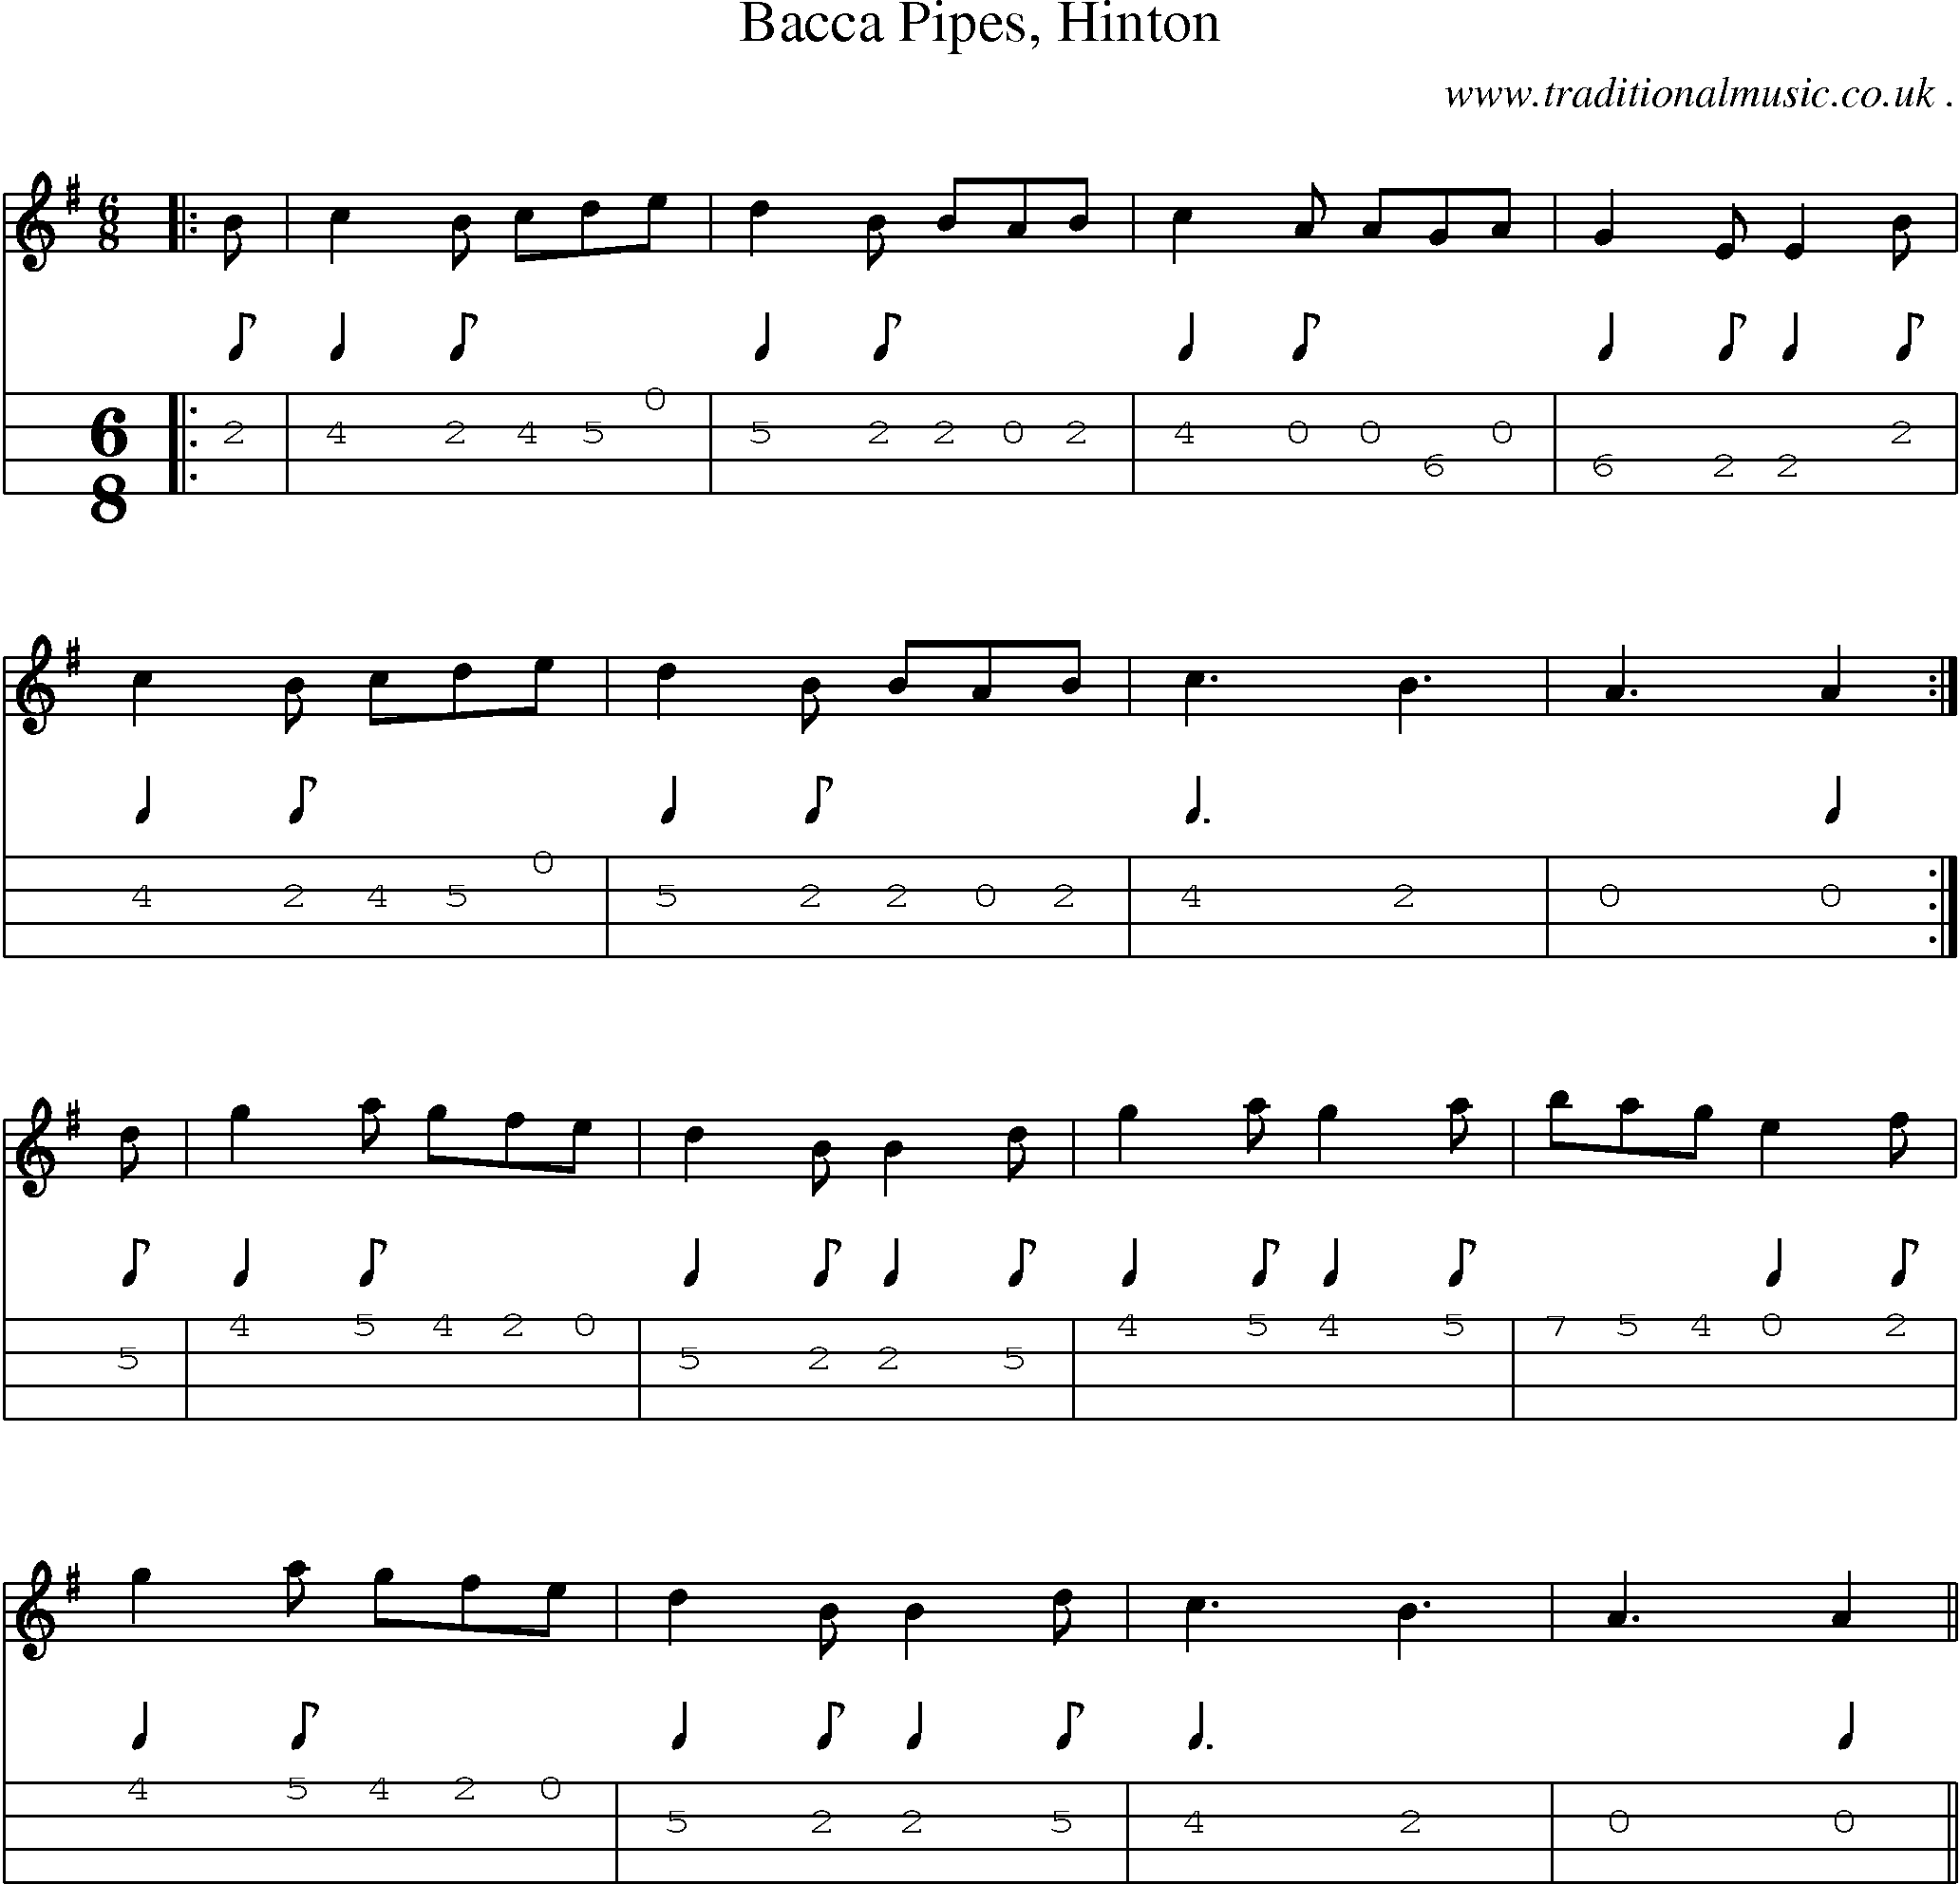 Sheet-Music and Mandolin Tabs for Bacca Pipes Hinton